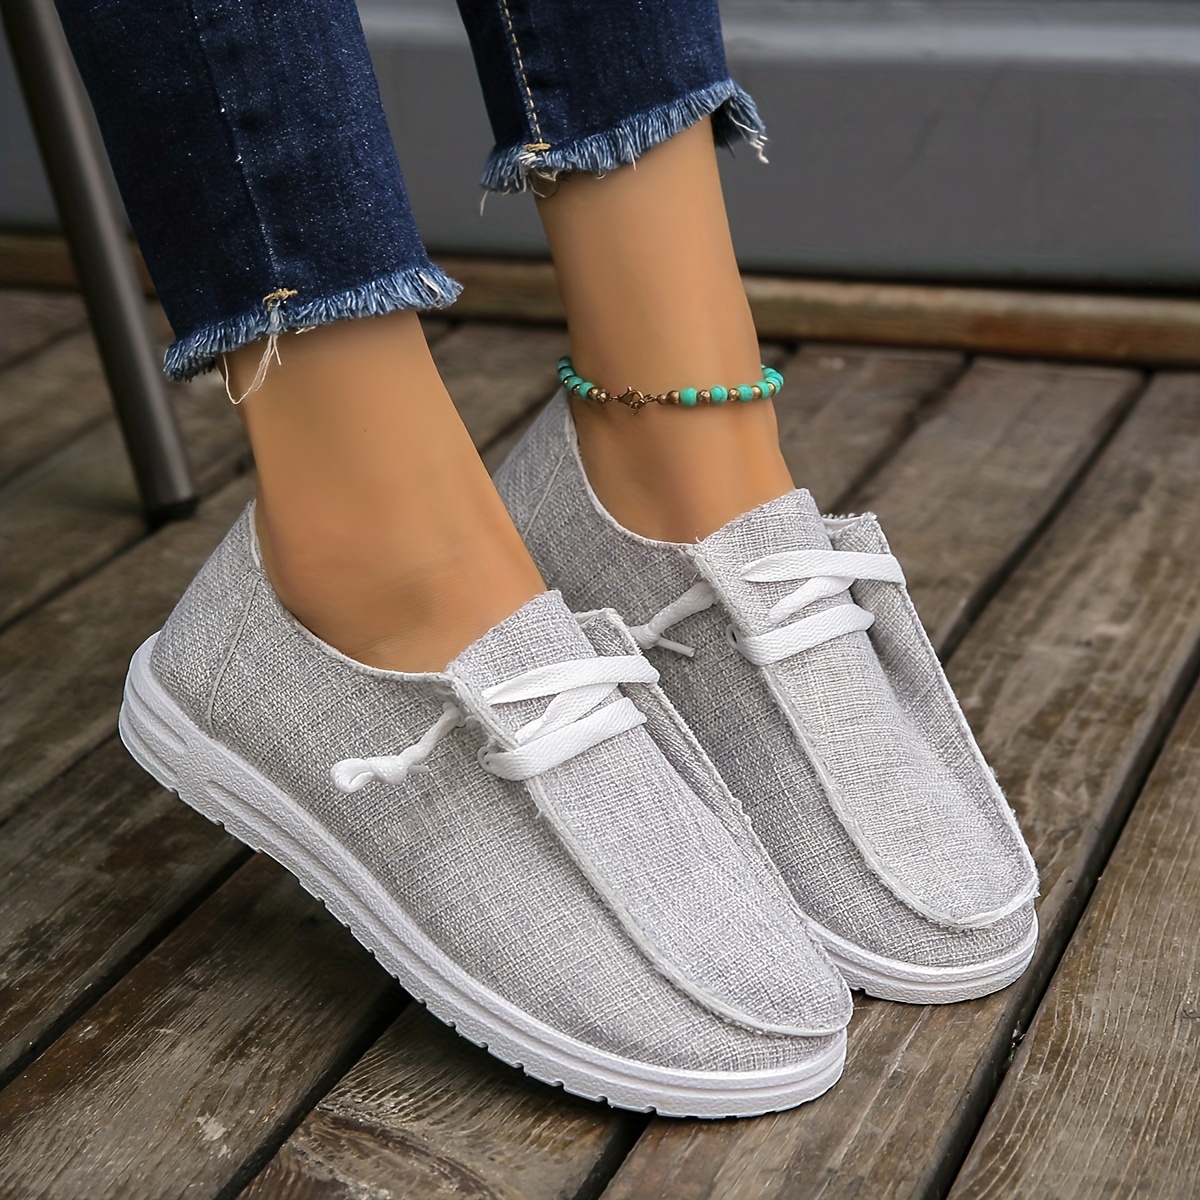 

Women's Fashion Flat Loafer Shoes, Round Toe Lace Up Slip On Low Top Sneakers, Casual Canvas Shoes